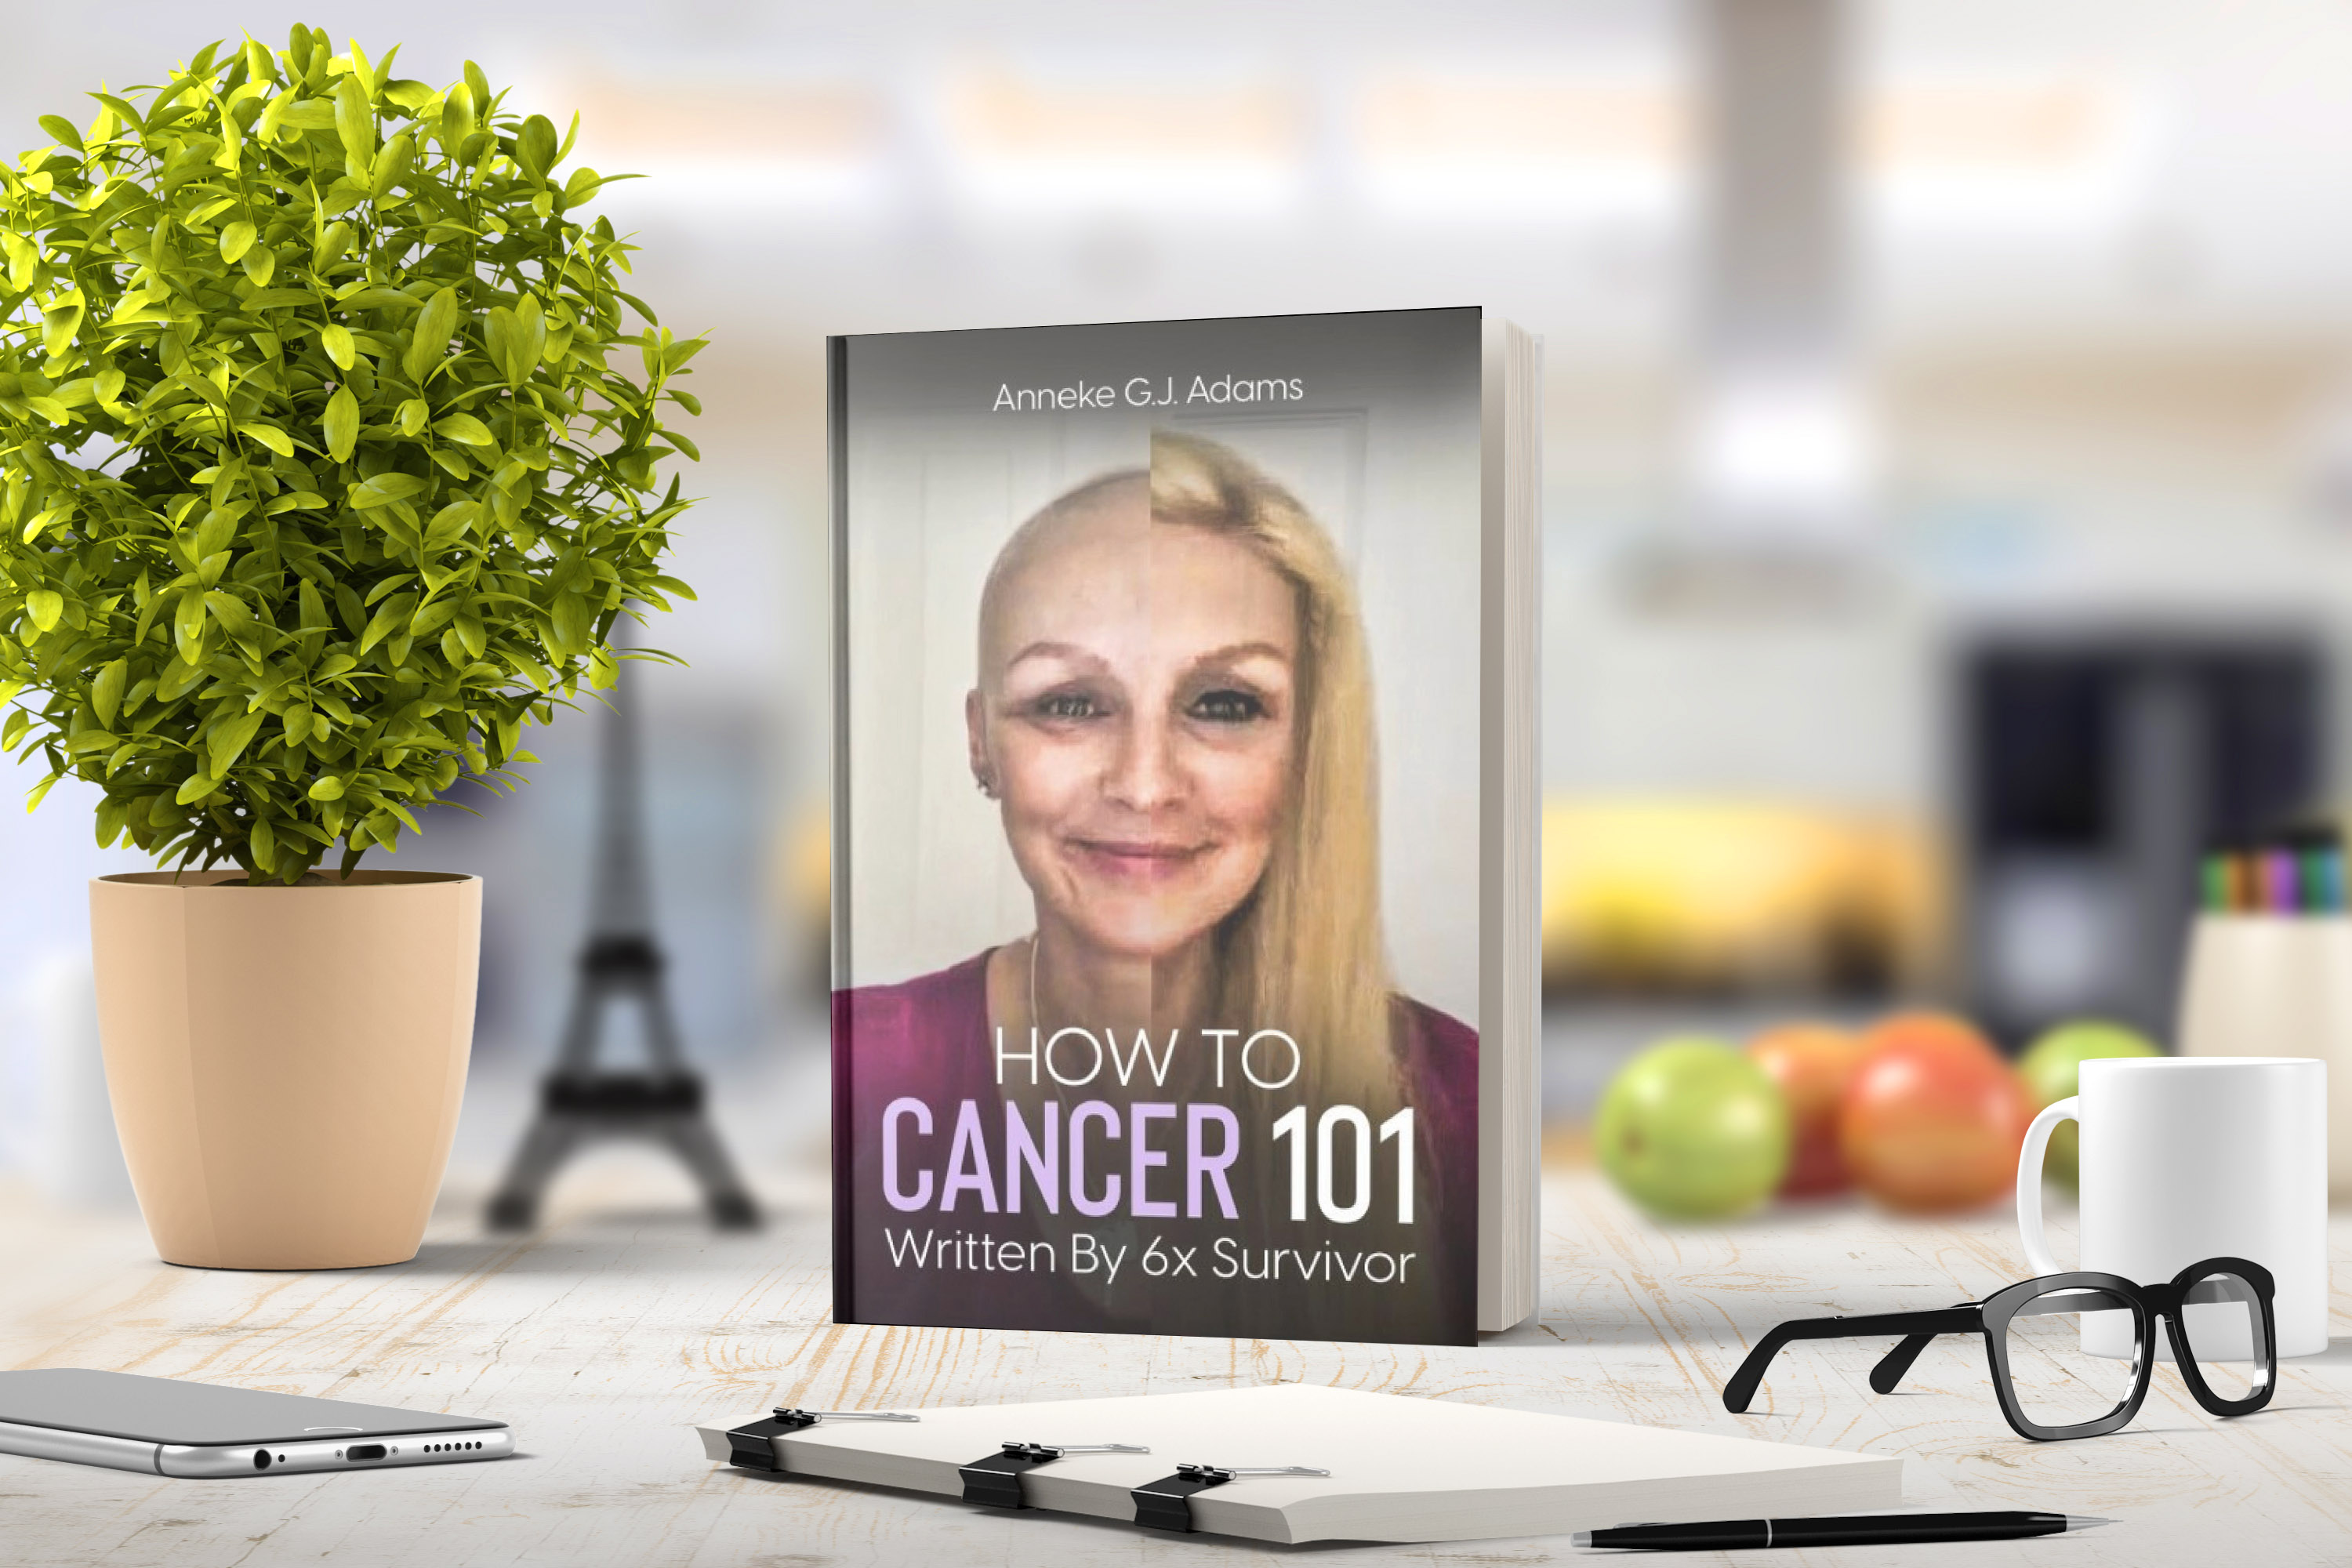 Six-time Cancer Survivor Pens Book "How to Cancer 101" and Set to Launch in March